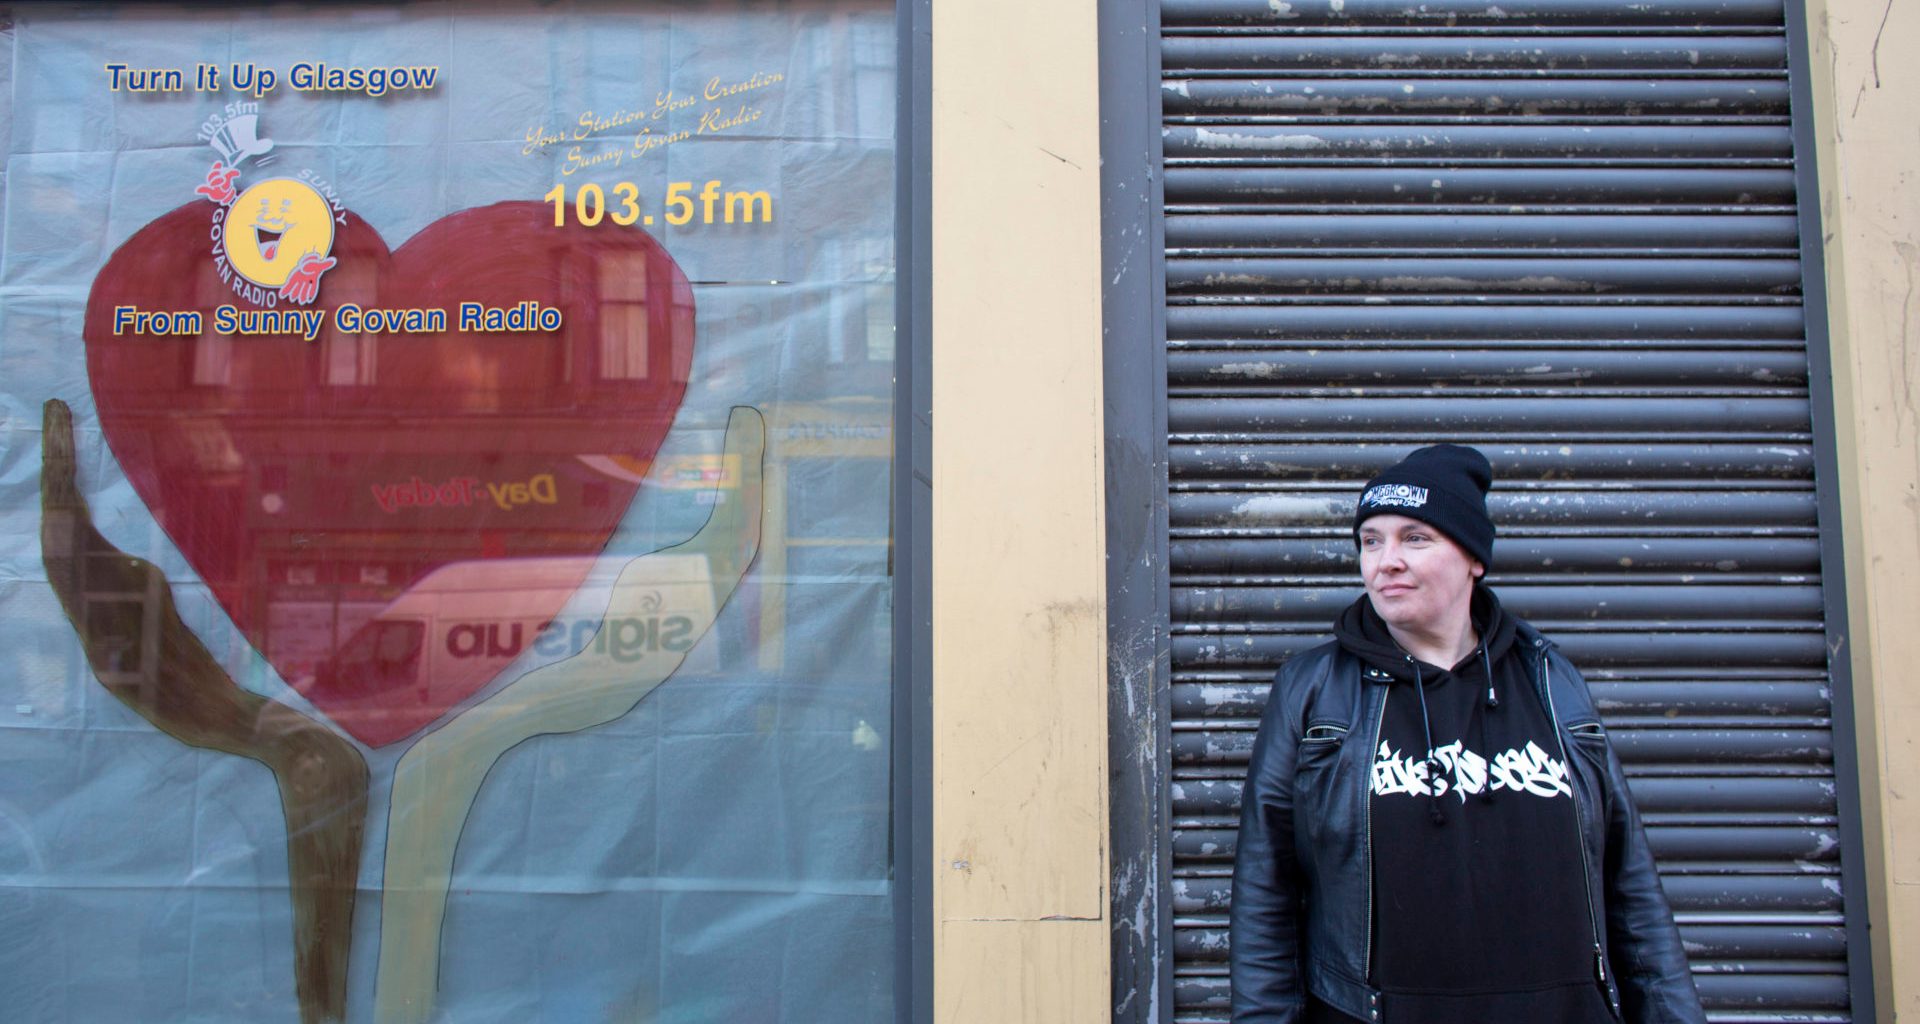 Sun is shining: the community radio station fighting for survival 5